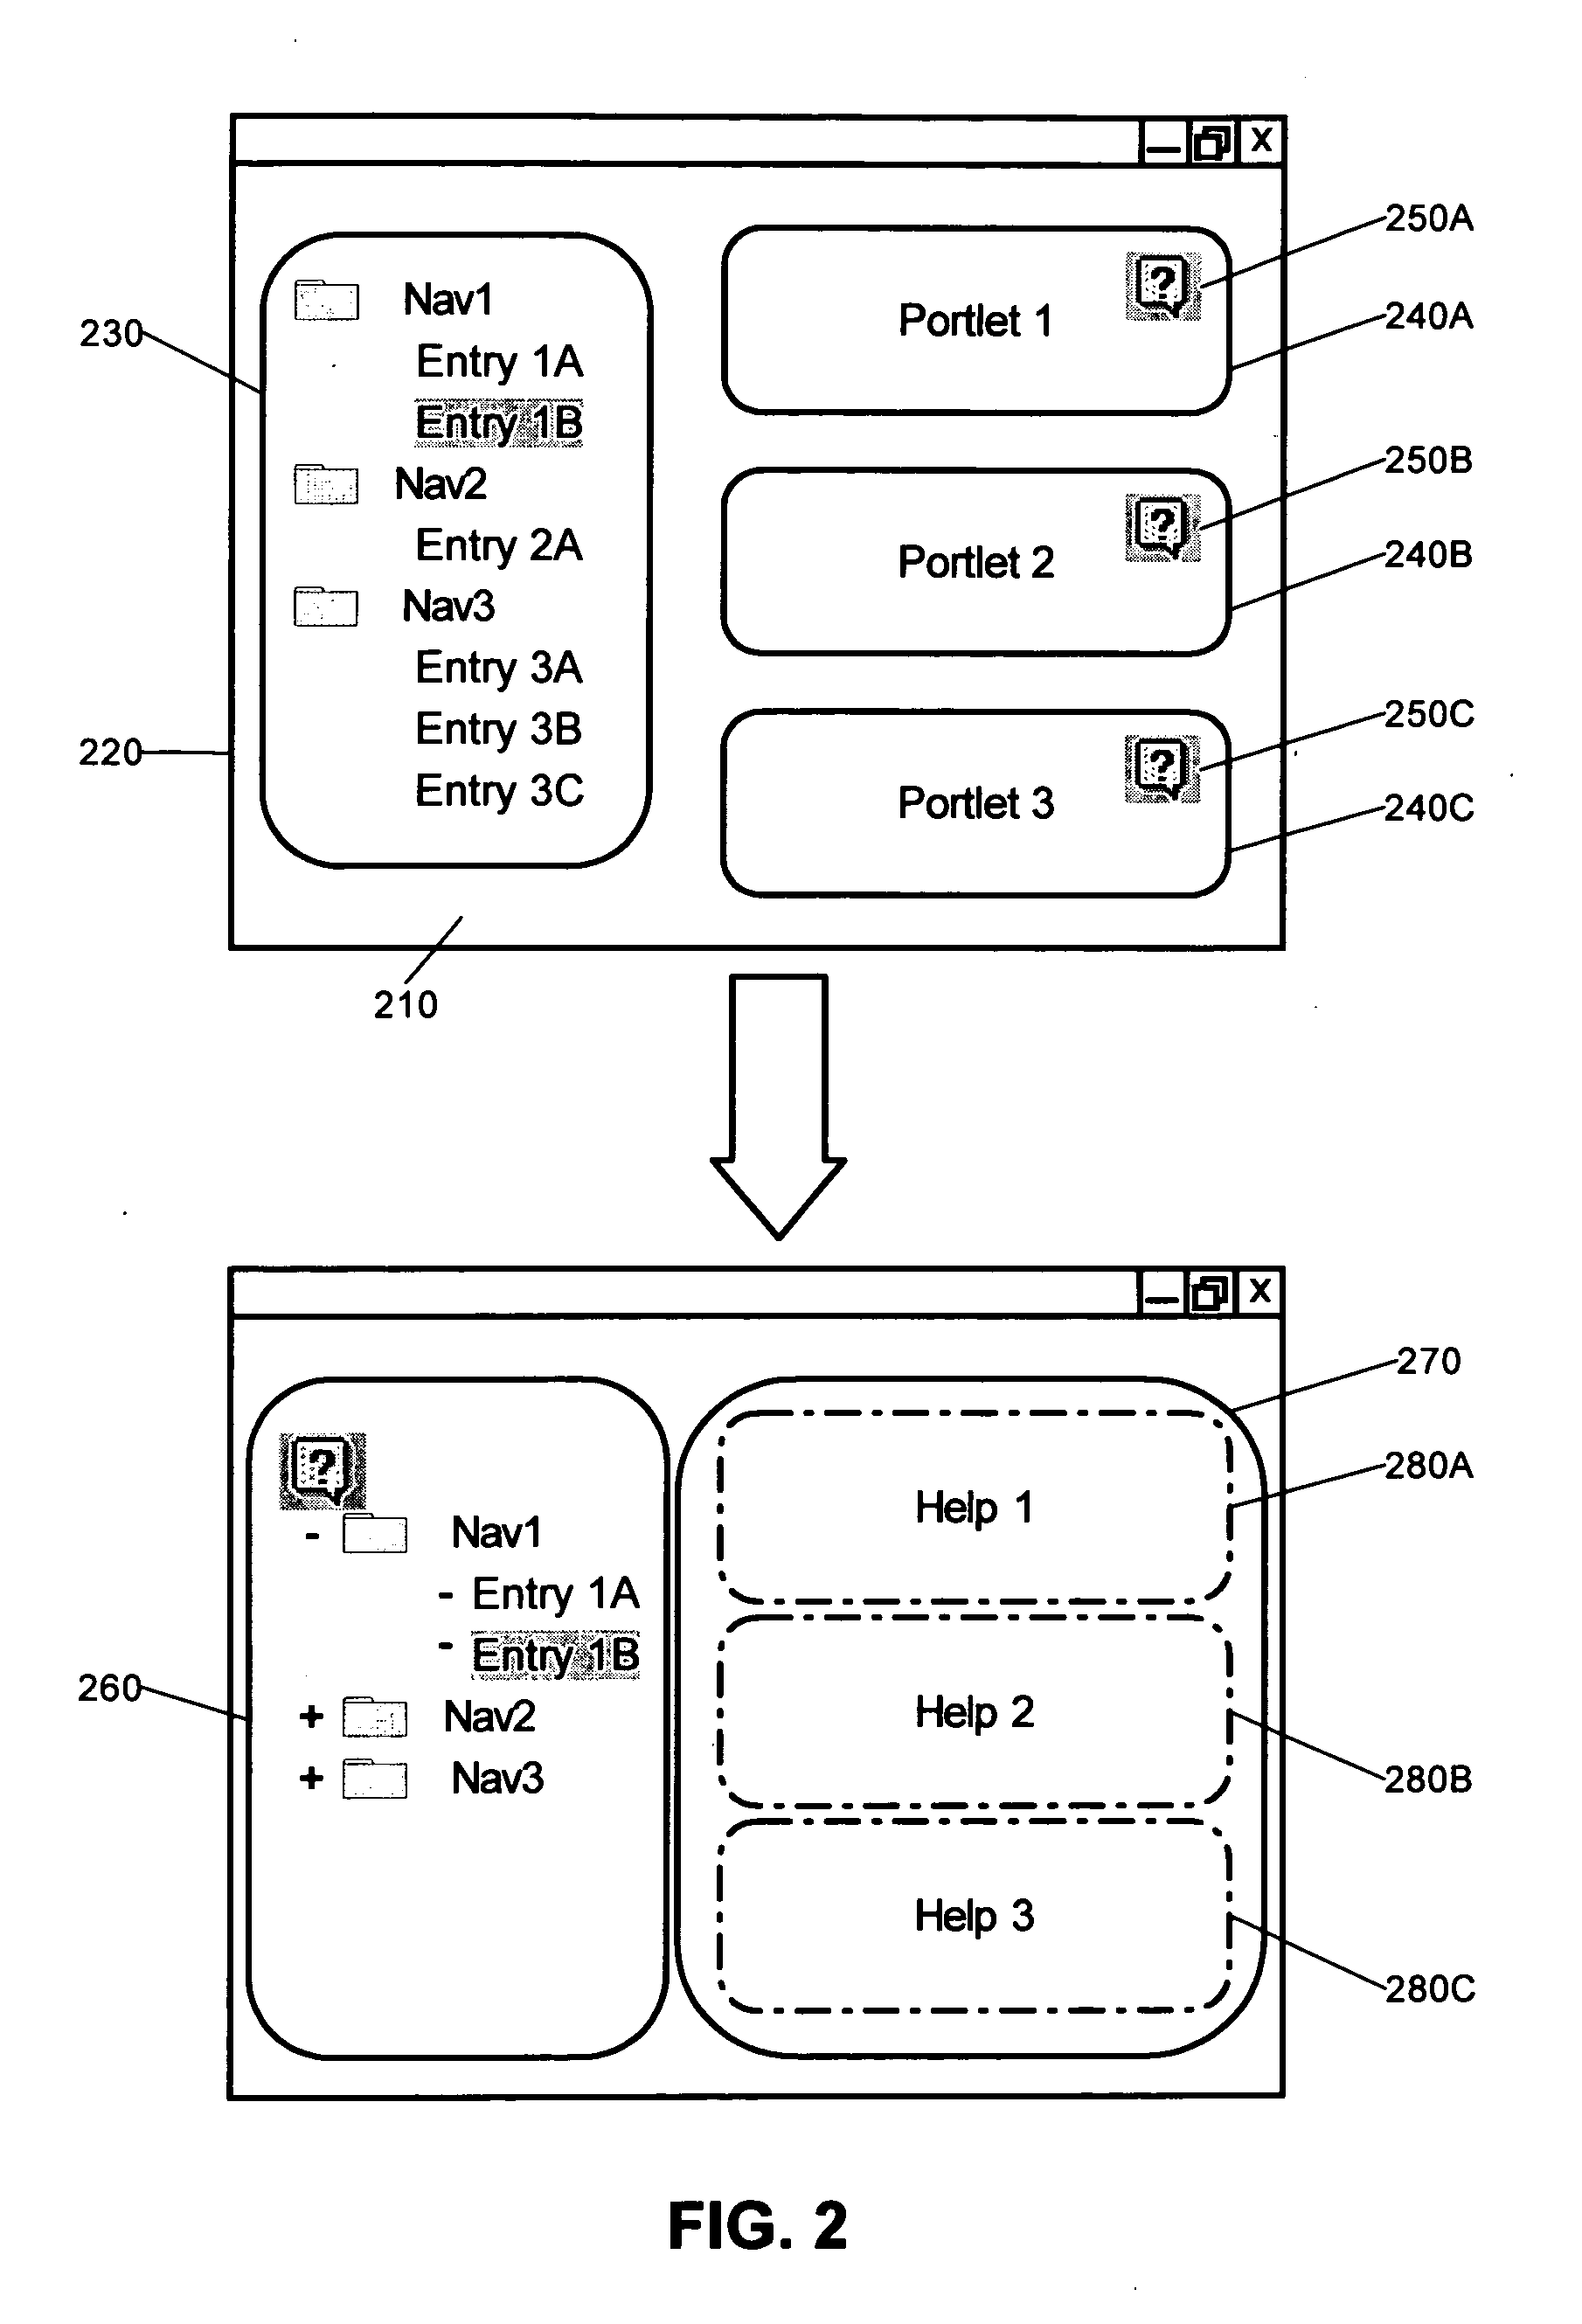 Dynamic composition of help information for an aggregation of applications